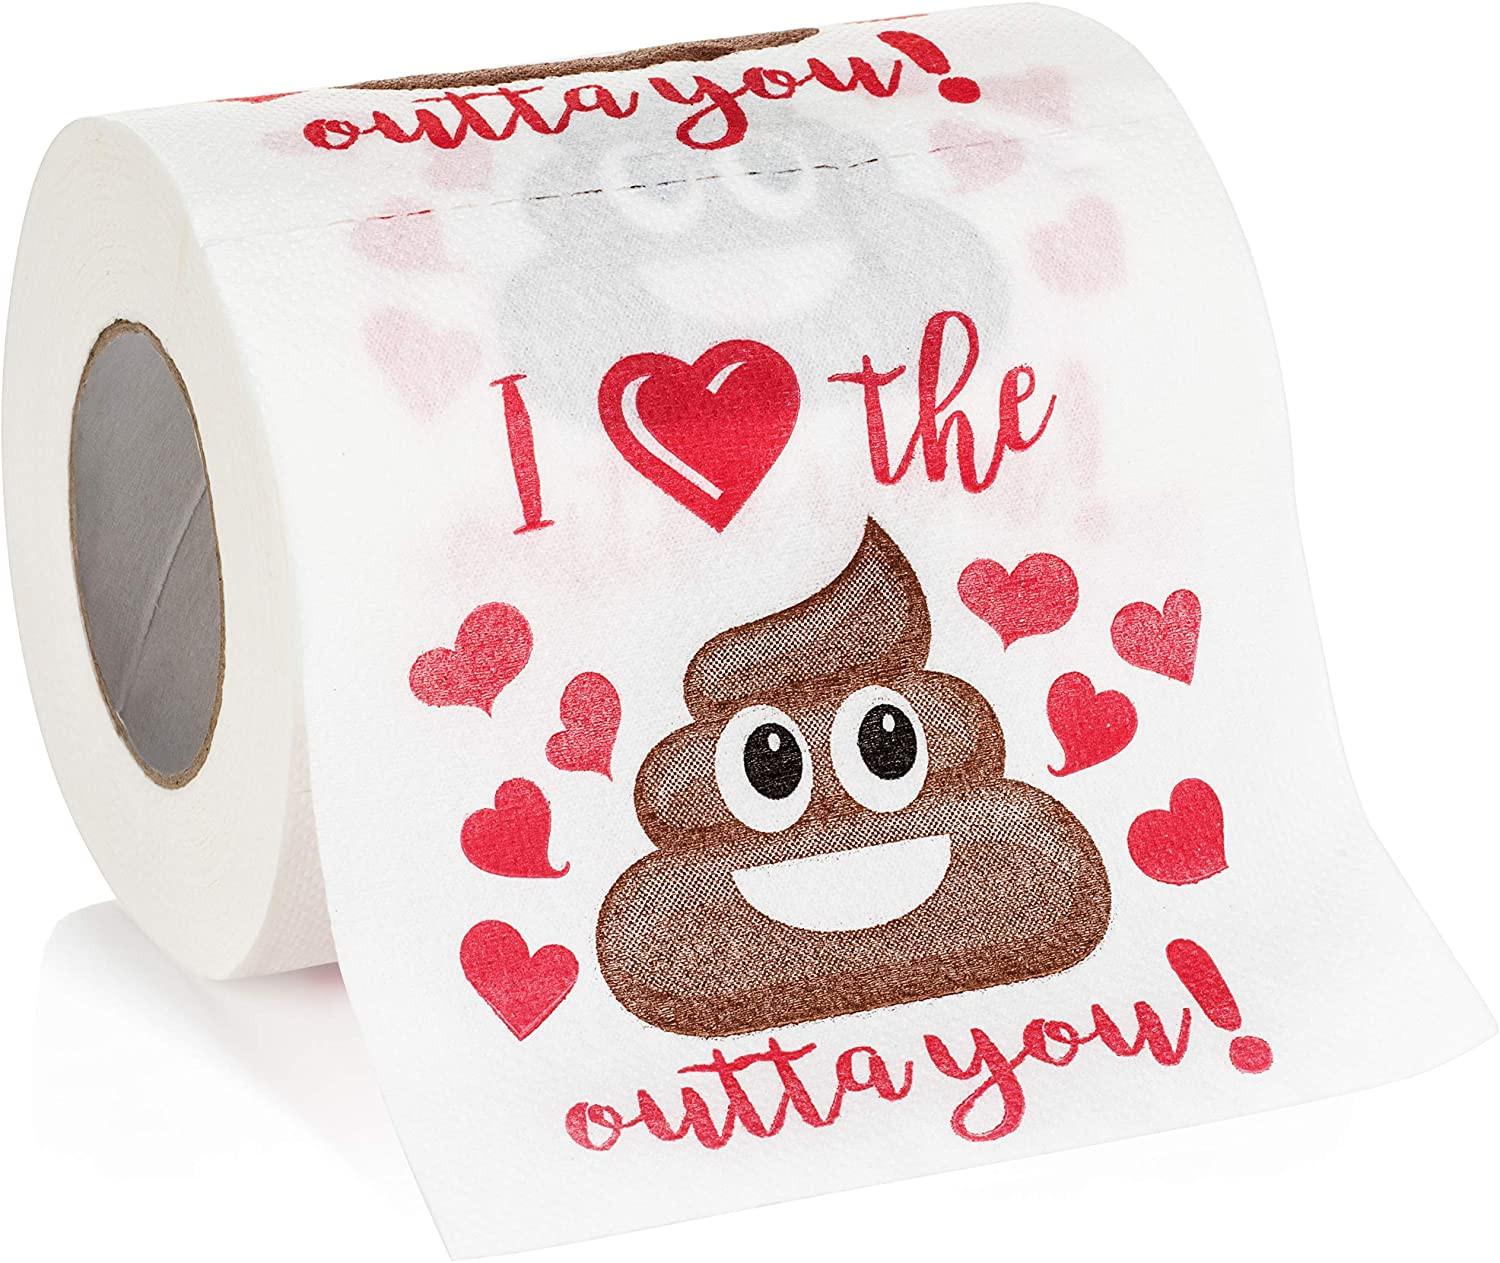 Funny Valentines Day Gifts
 12 Funny Valentine’s Day Gifts Last Minute Amazon Prime